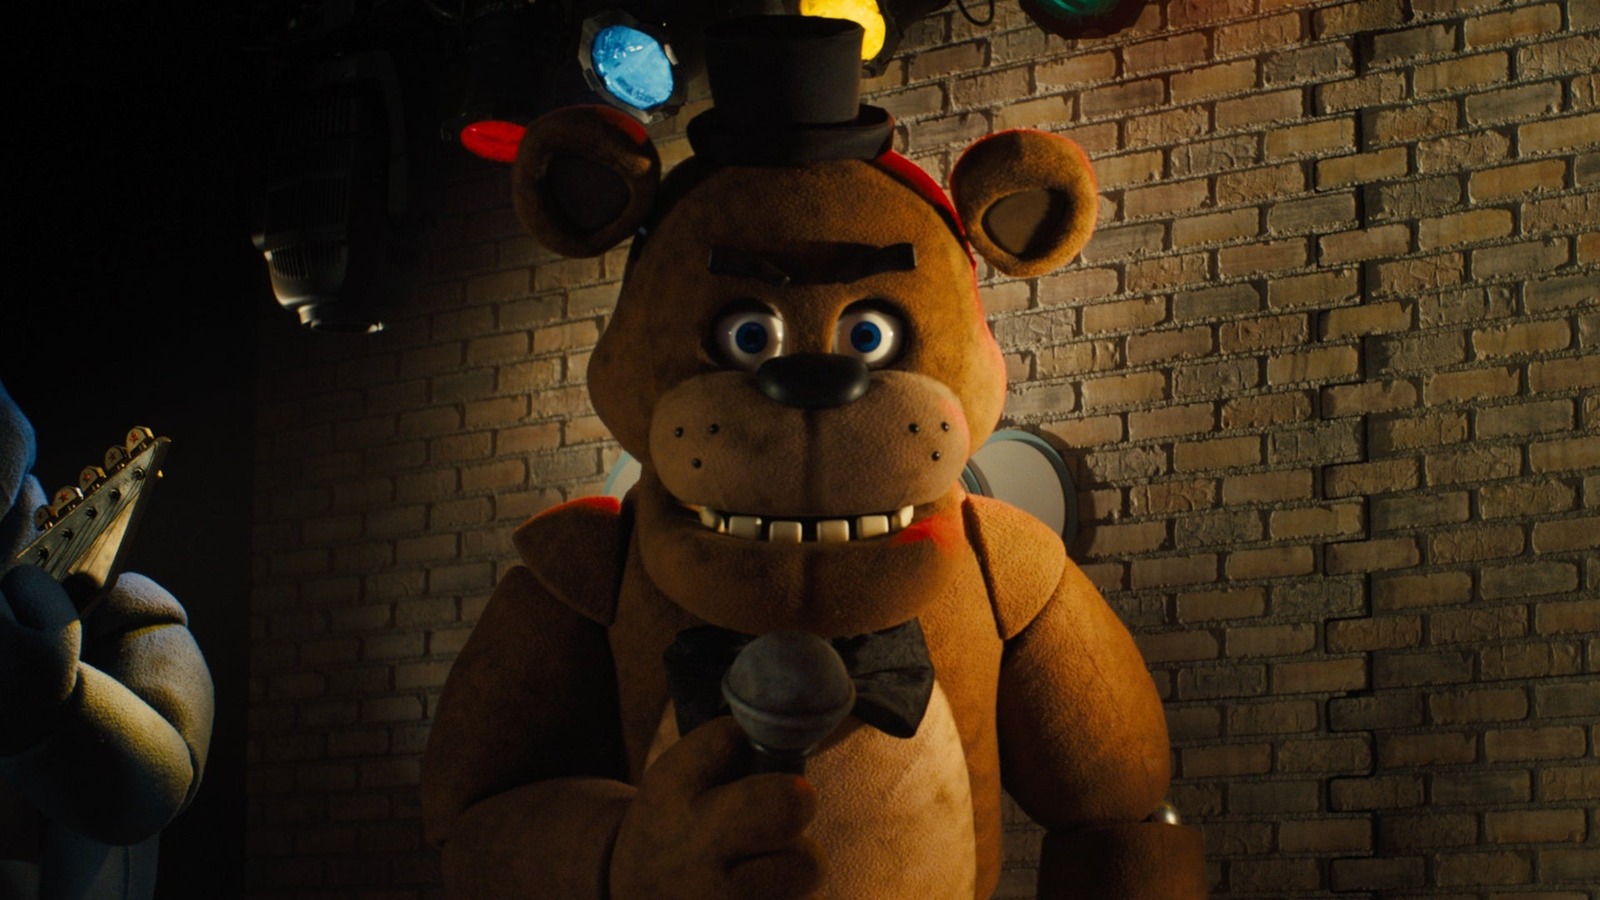 Five Nights at Freddy's Movie (2023)